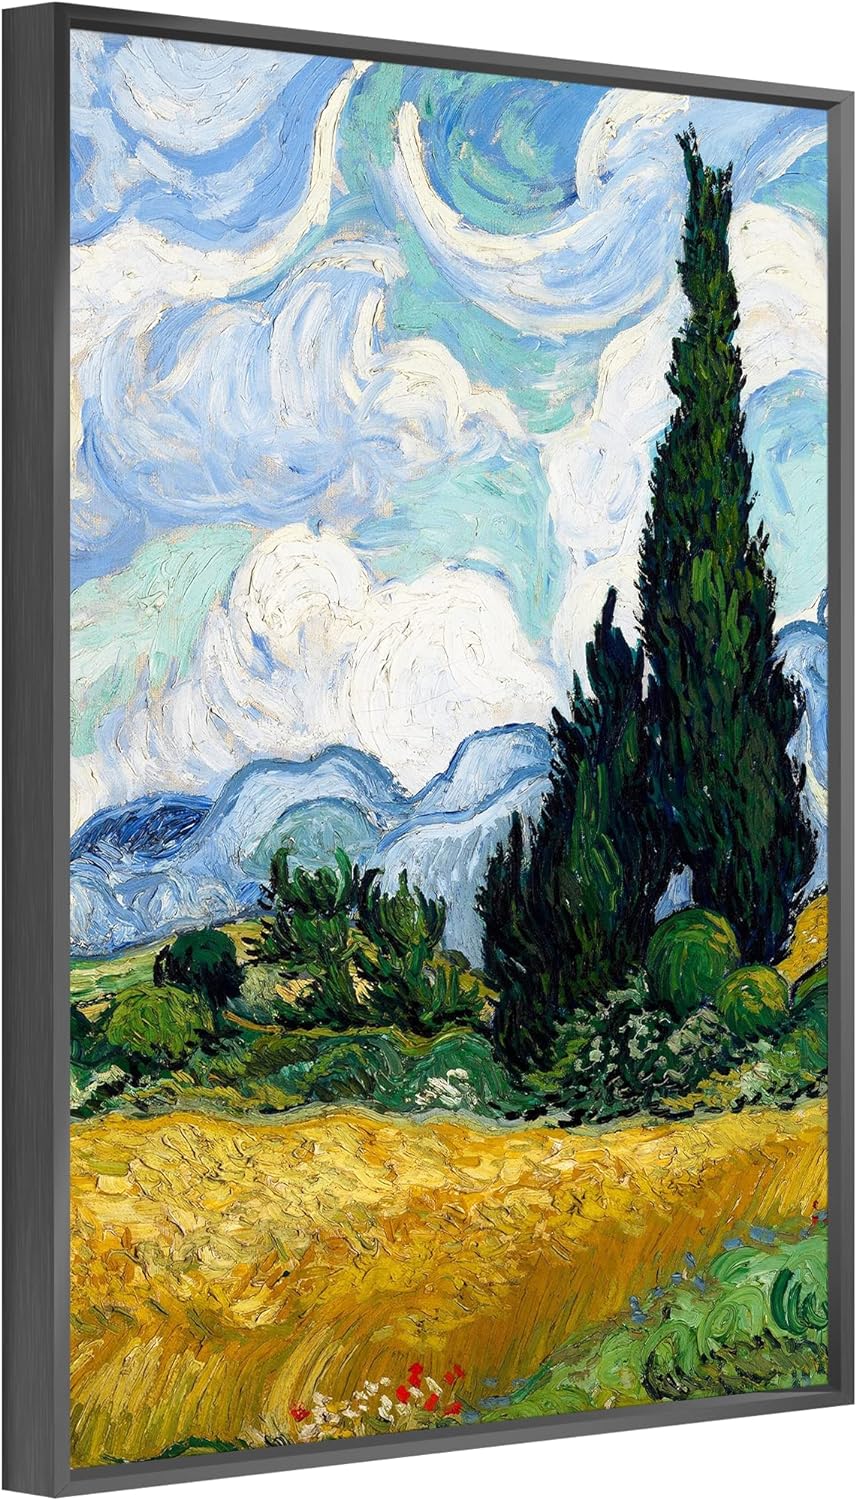 jenesaisquoi Framed Canvas Wall Art, Wheat Field with Cypresses Van Gogh Art Prints, Van Gogh Artwork Famous Art Oil Paintings Ready To Hang for Living Room, Bedroom, Office (Black Frame, 12 x 16)